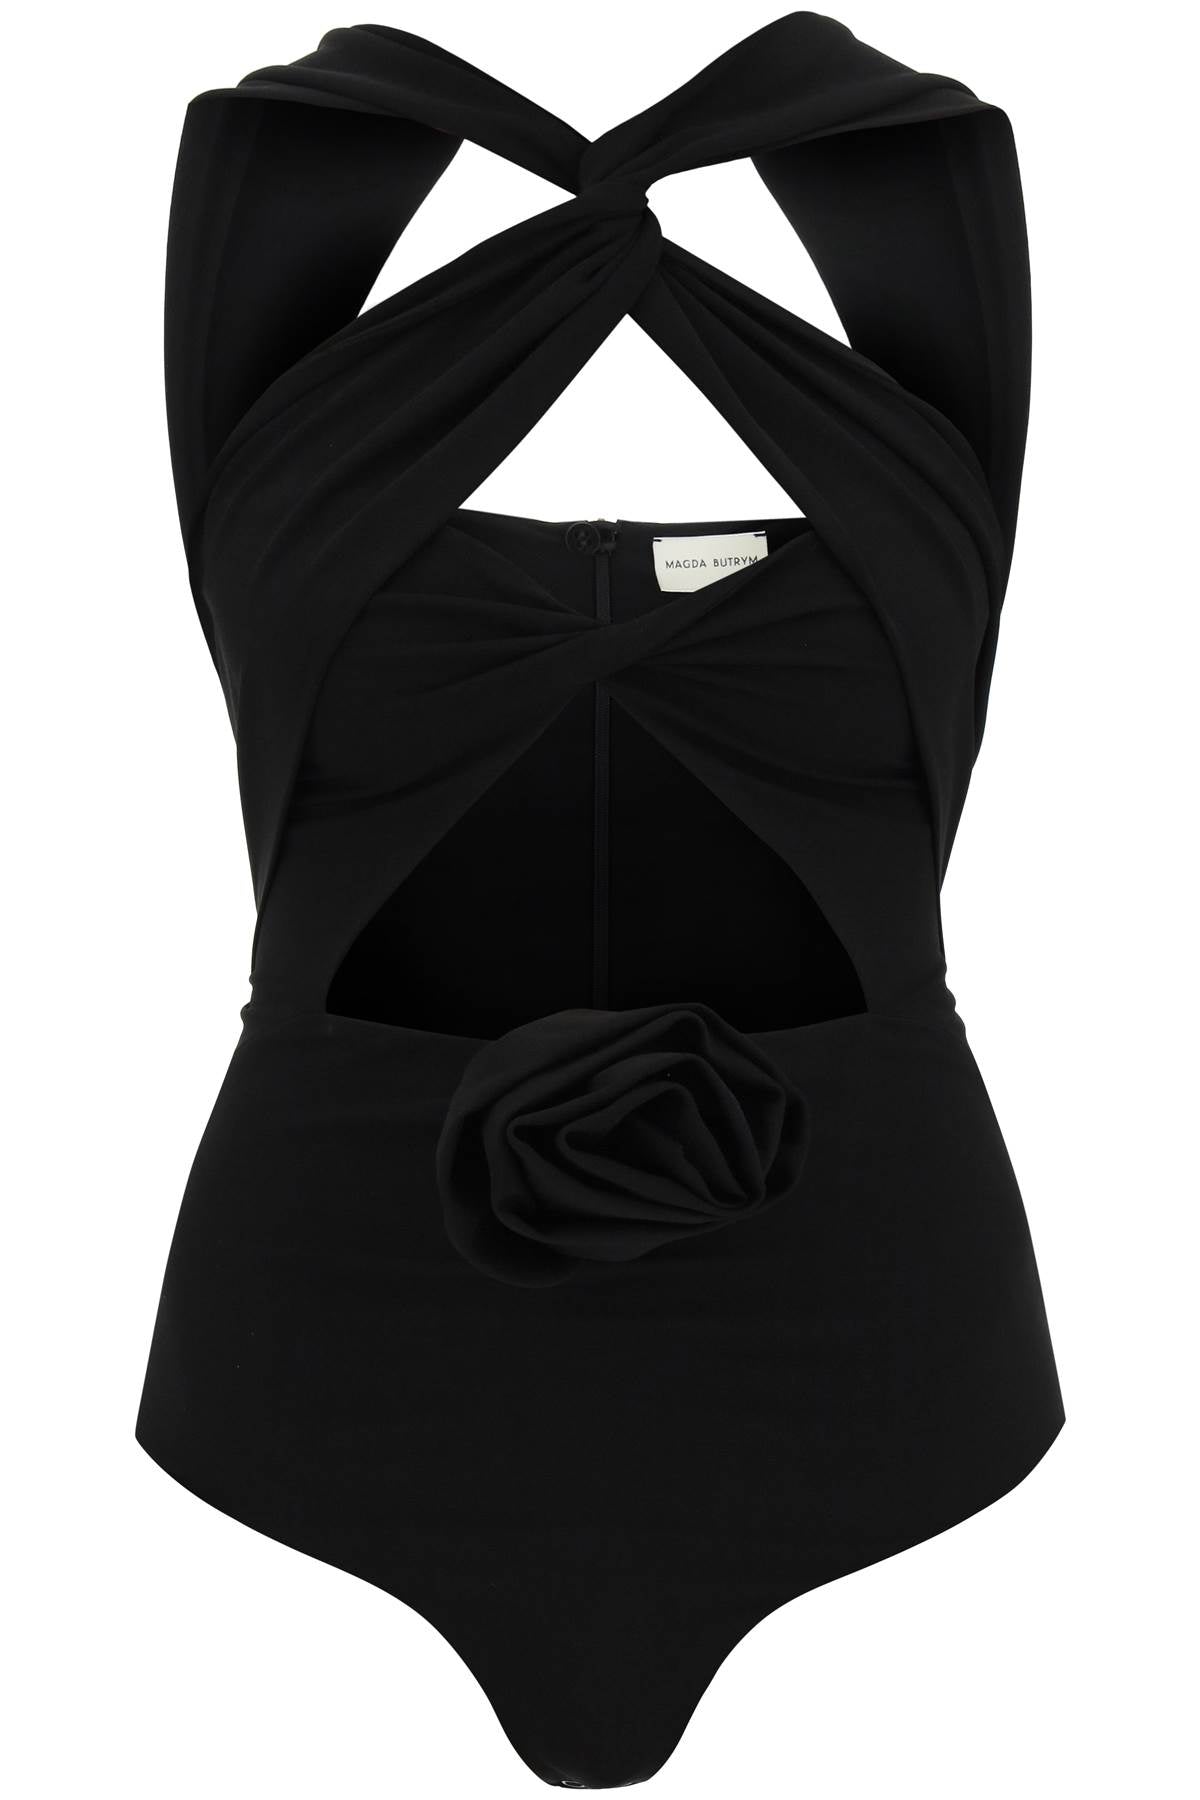 Magda butrym cut-out bodysuit with rose applique-0